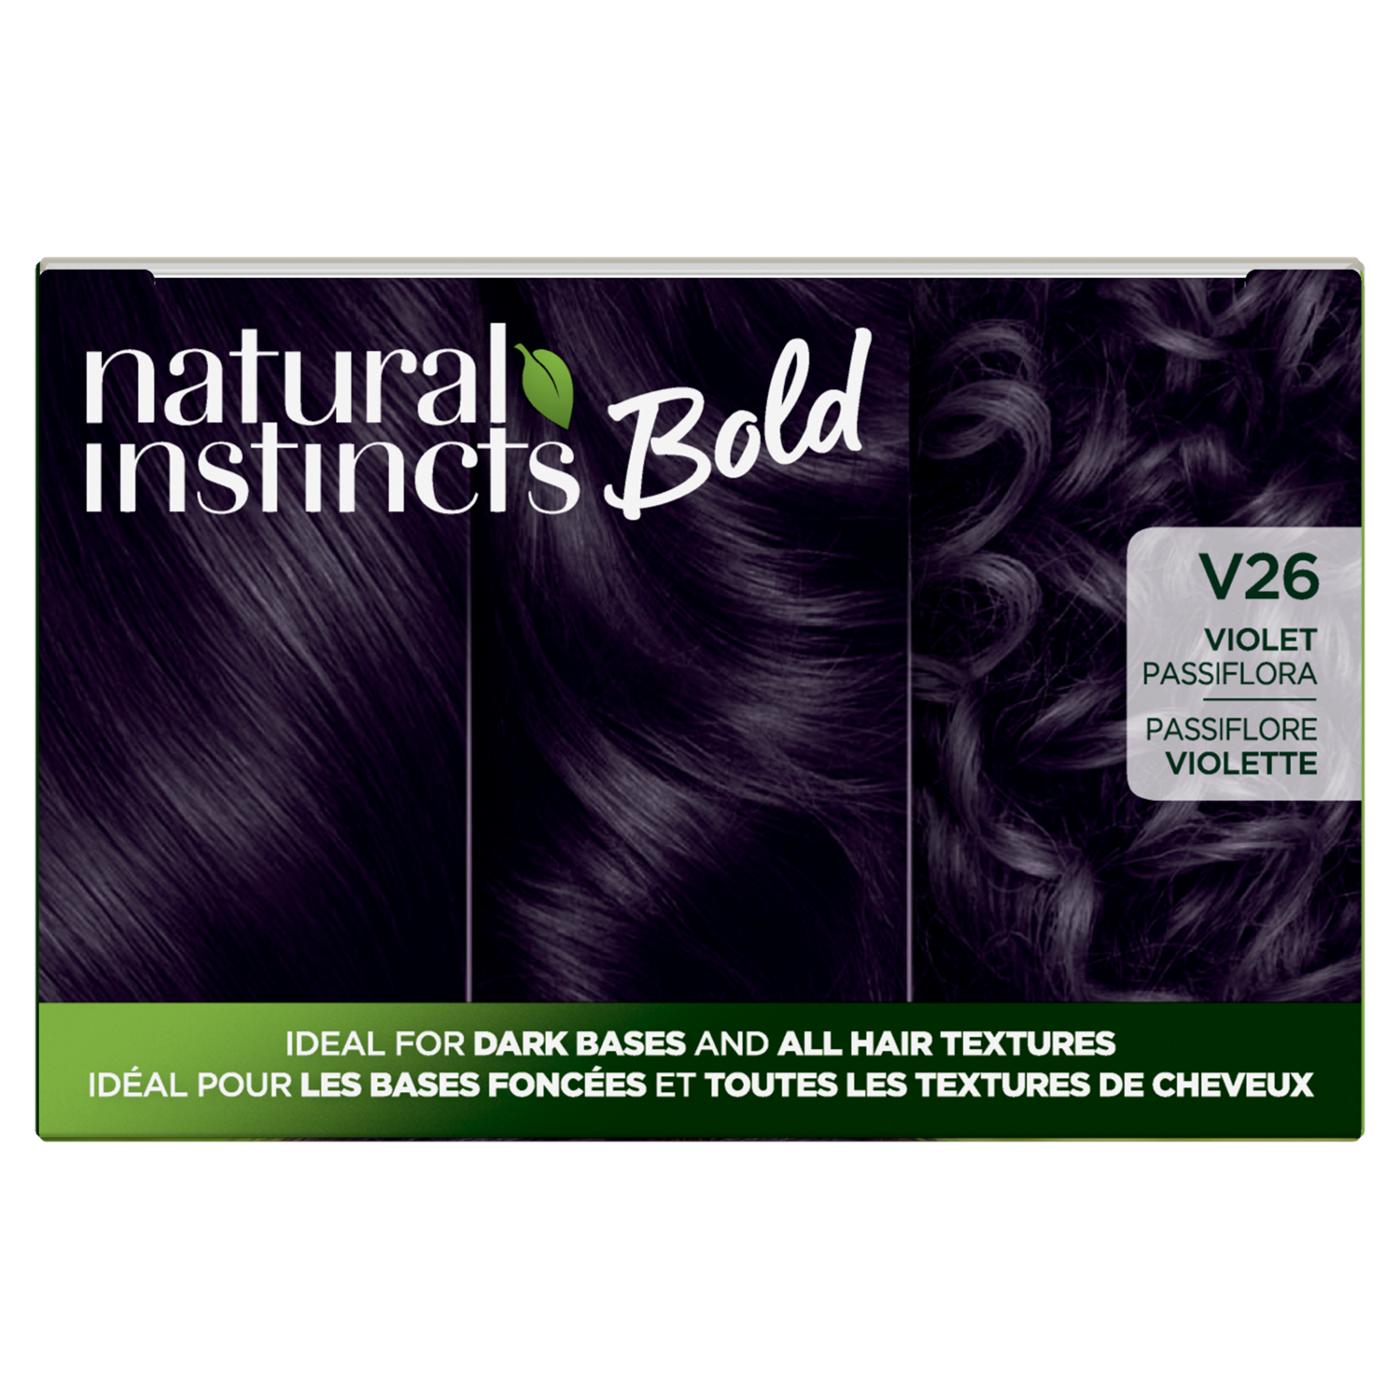 Clairol Natural Instincts Bold Permanent Hair Color -  V26 Violet Passiflora ; image 2 of 6